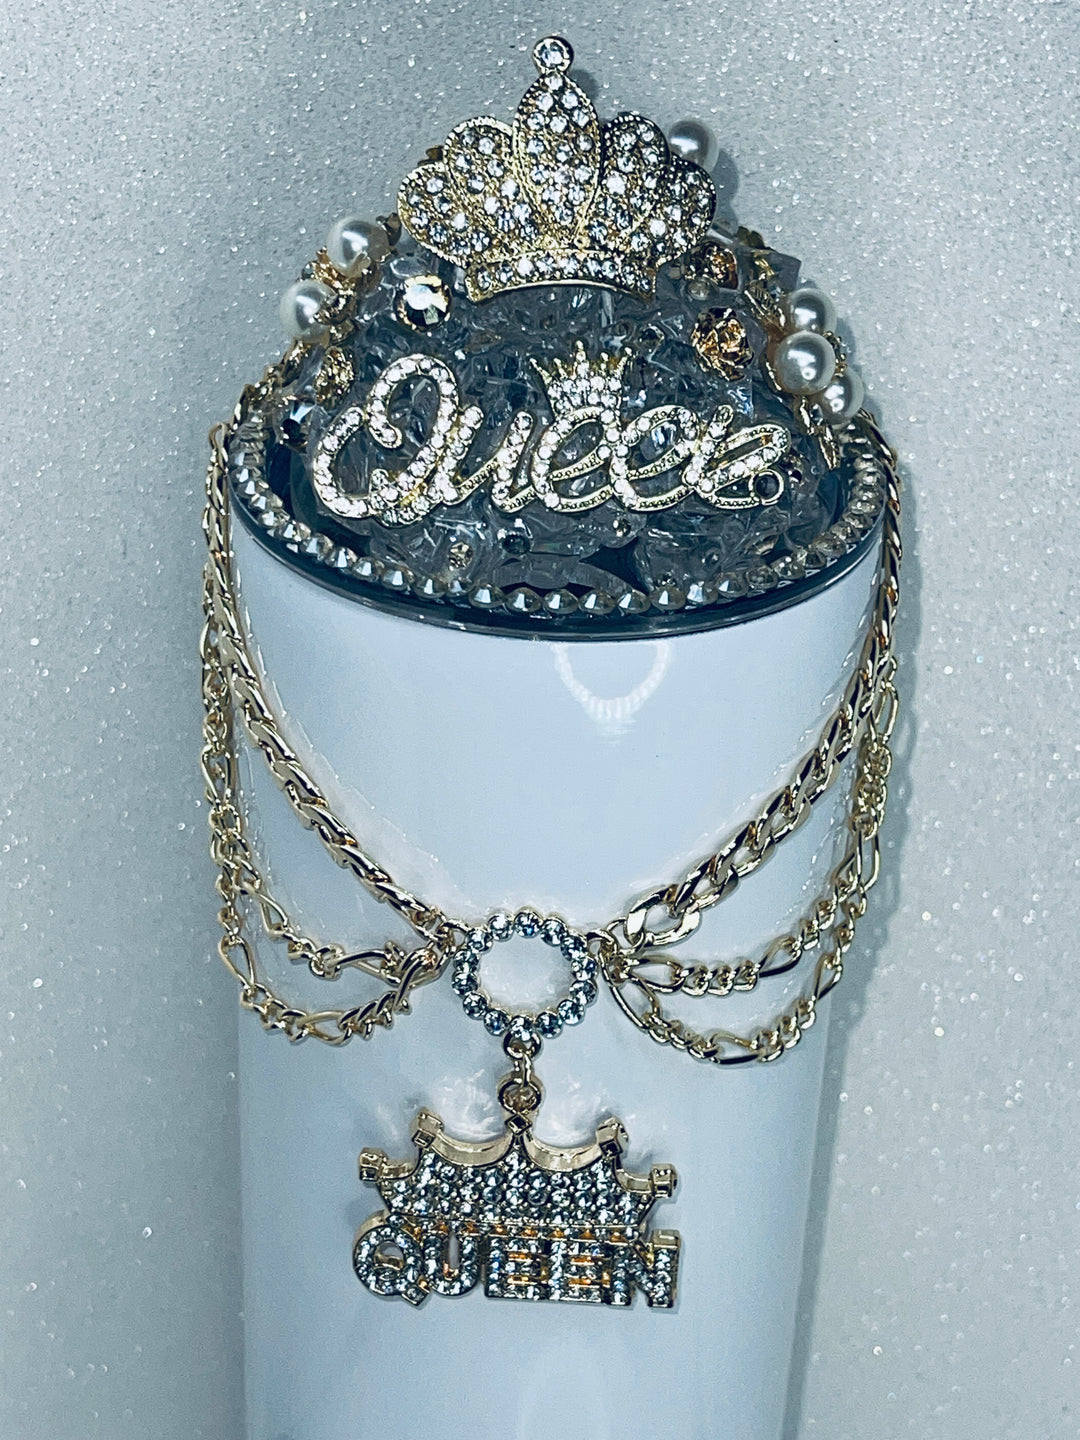 Queen Rhinestone Tumbler Topper with Queen chain added to the lid, Rhinestone Crown Topper, SIP IN STYLE!